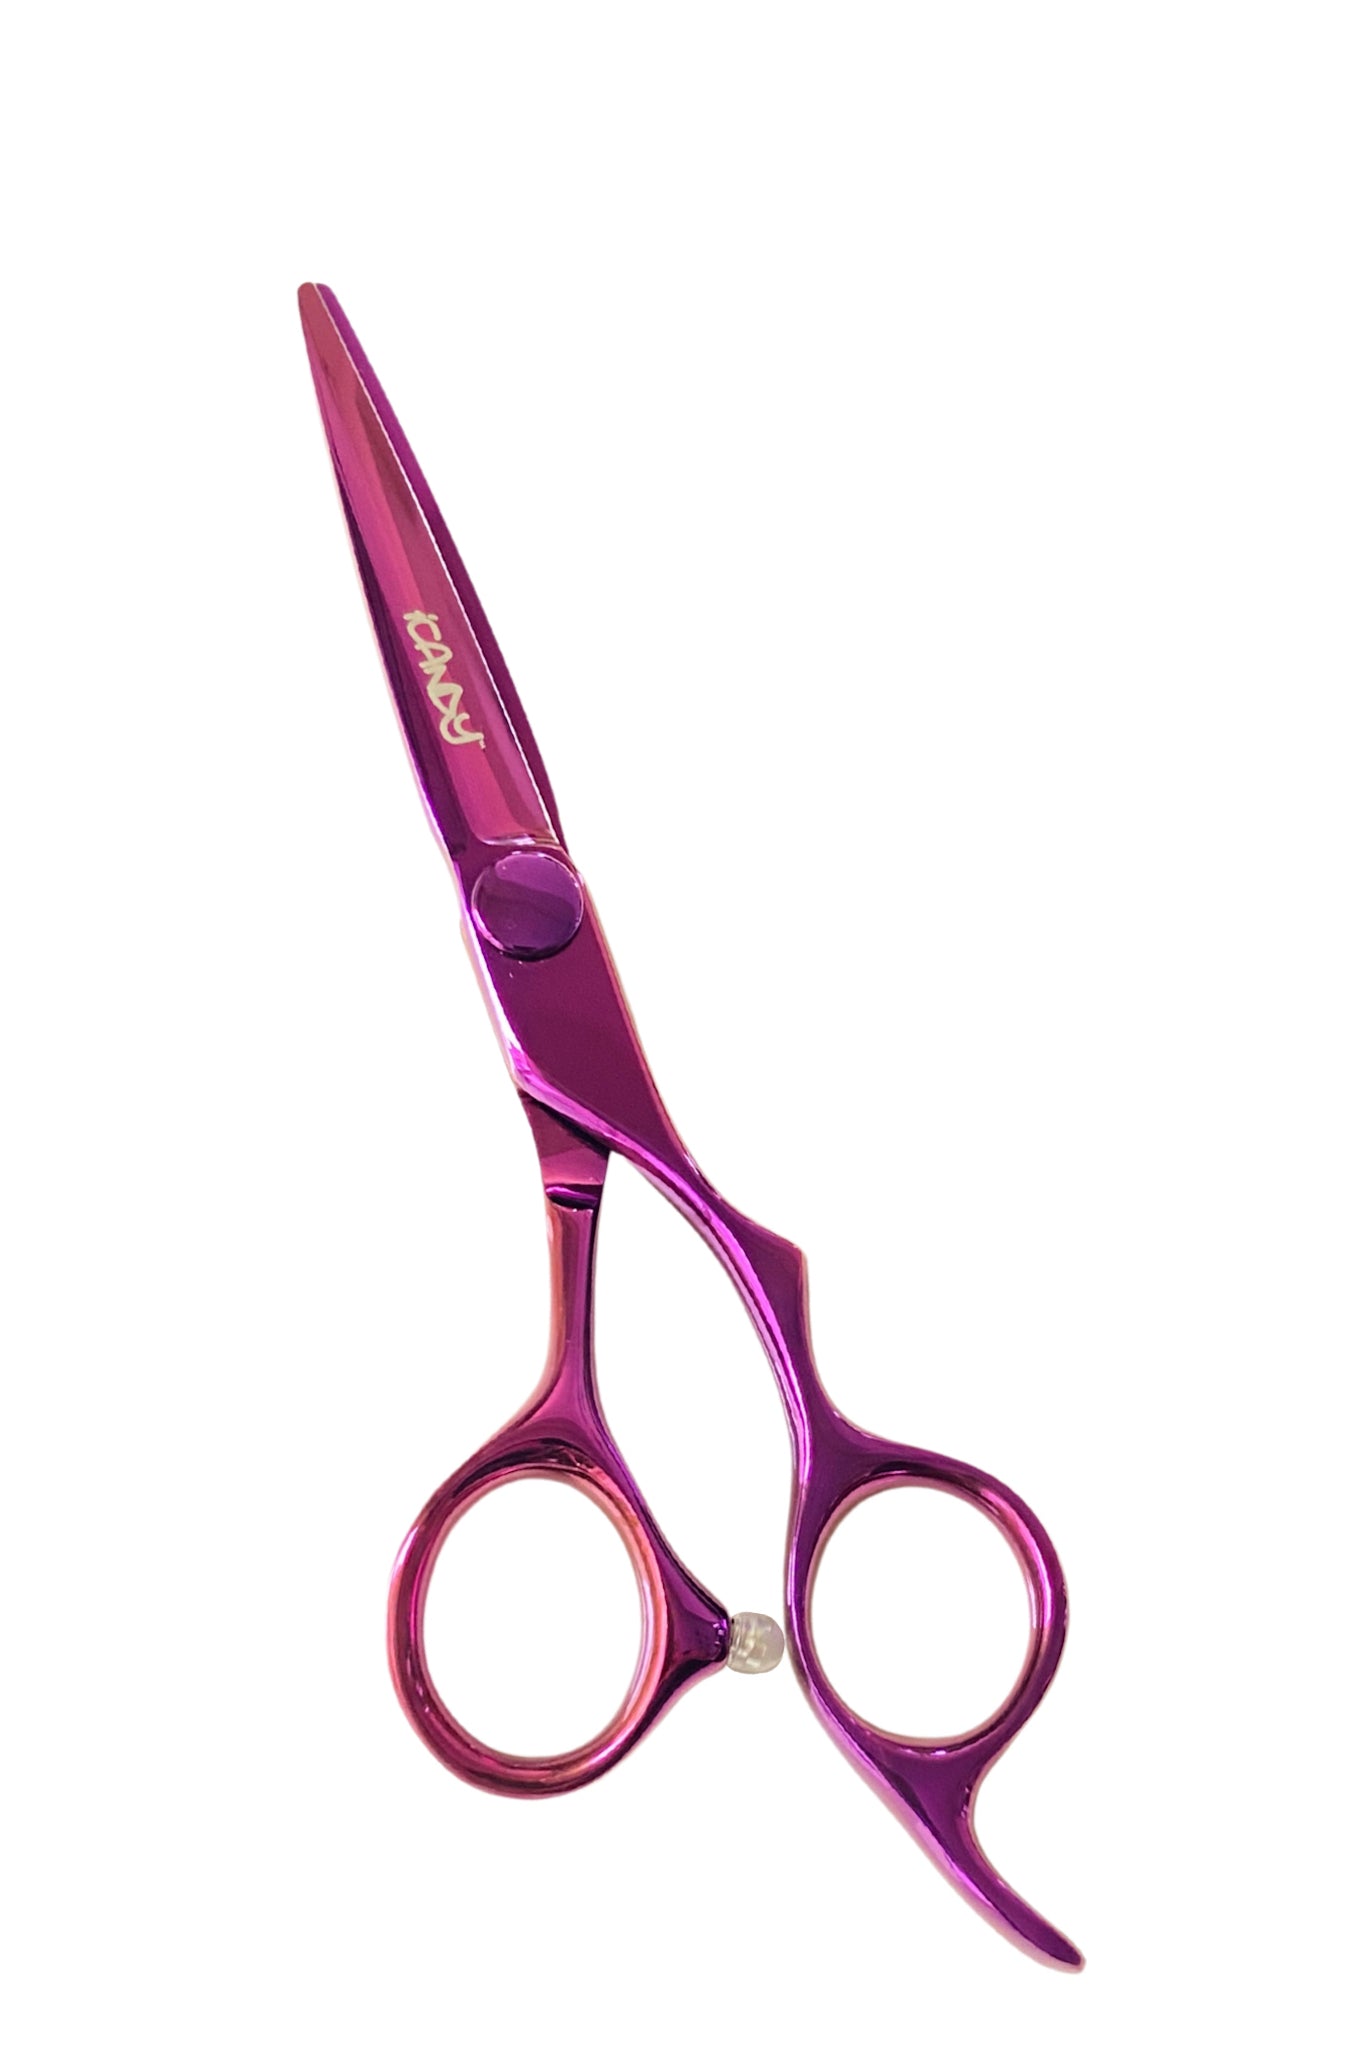 iCandy ELECTRO ULTRA Pink VG10 Scissor (5.5inch)